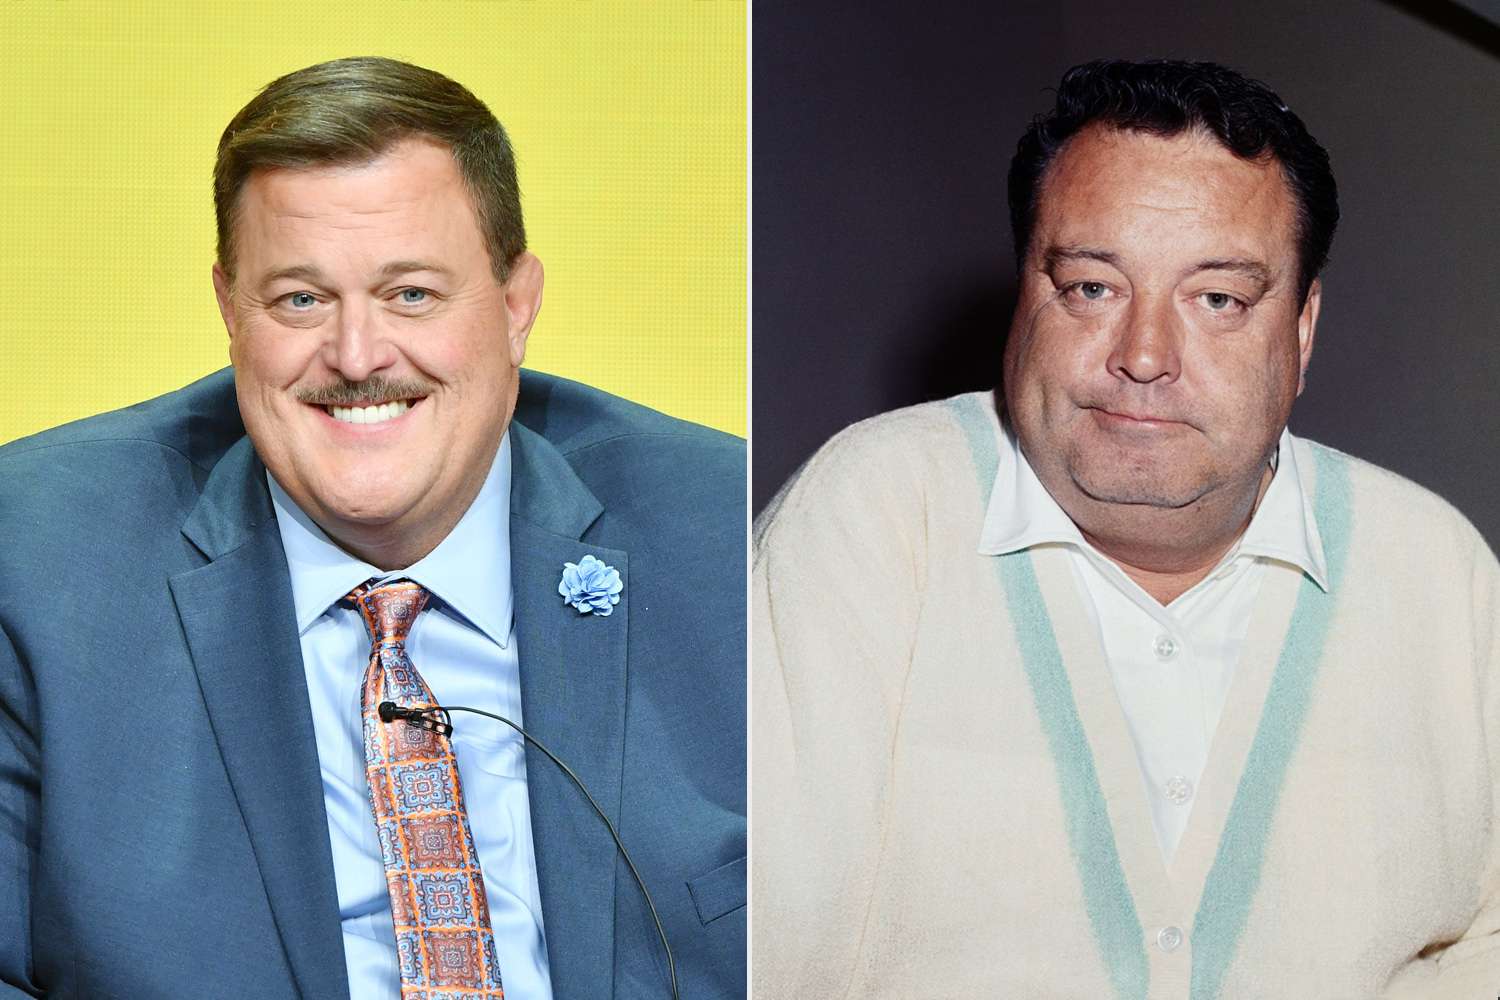 Billy Gardell Says Weight Loss Turned Him 'From a Young Jackie Glason to an Old Paul Newman' 